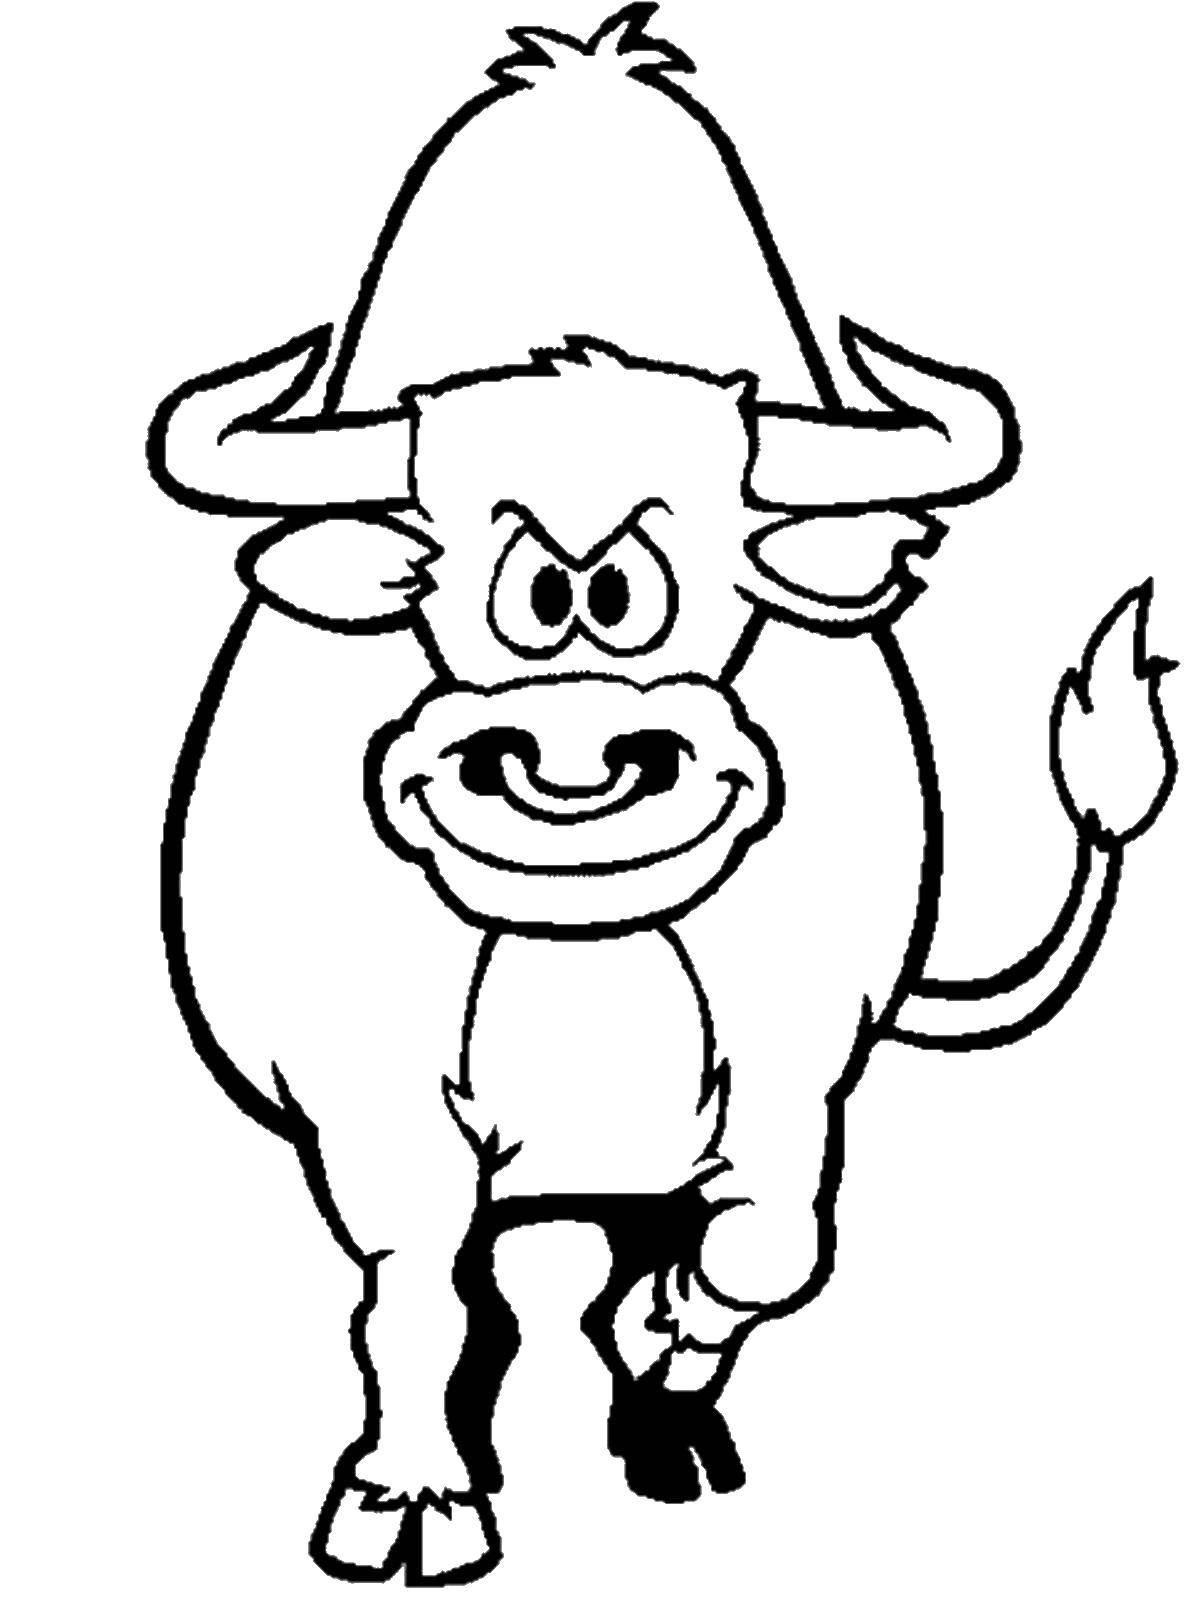 Coloring A bull with a nose ring. Category Pets allowed. Tags:  Animals, bull.